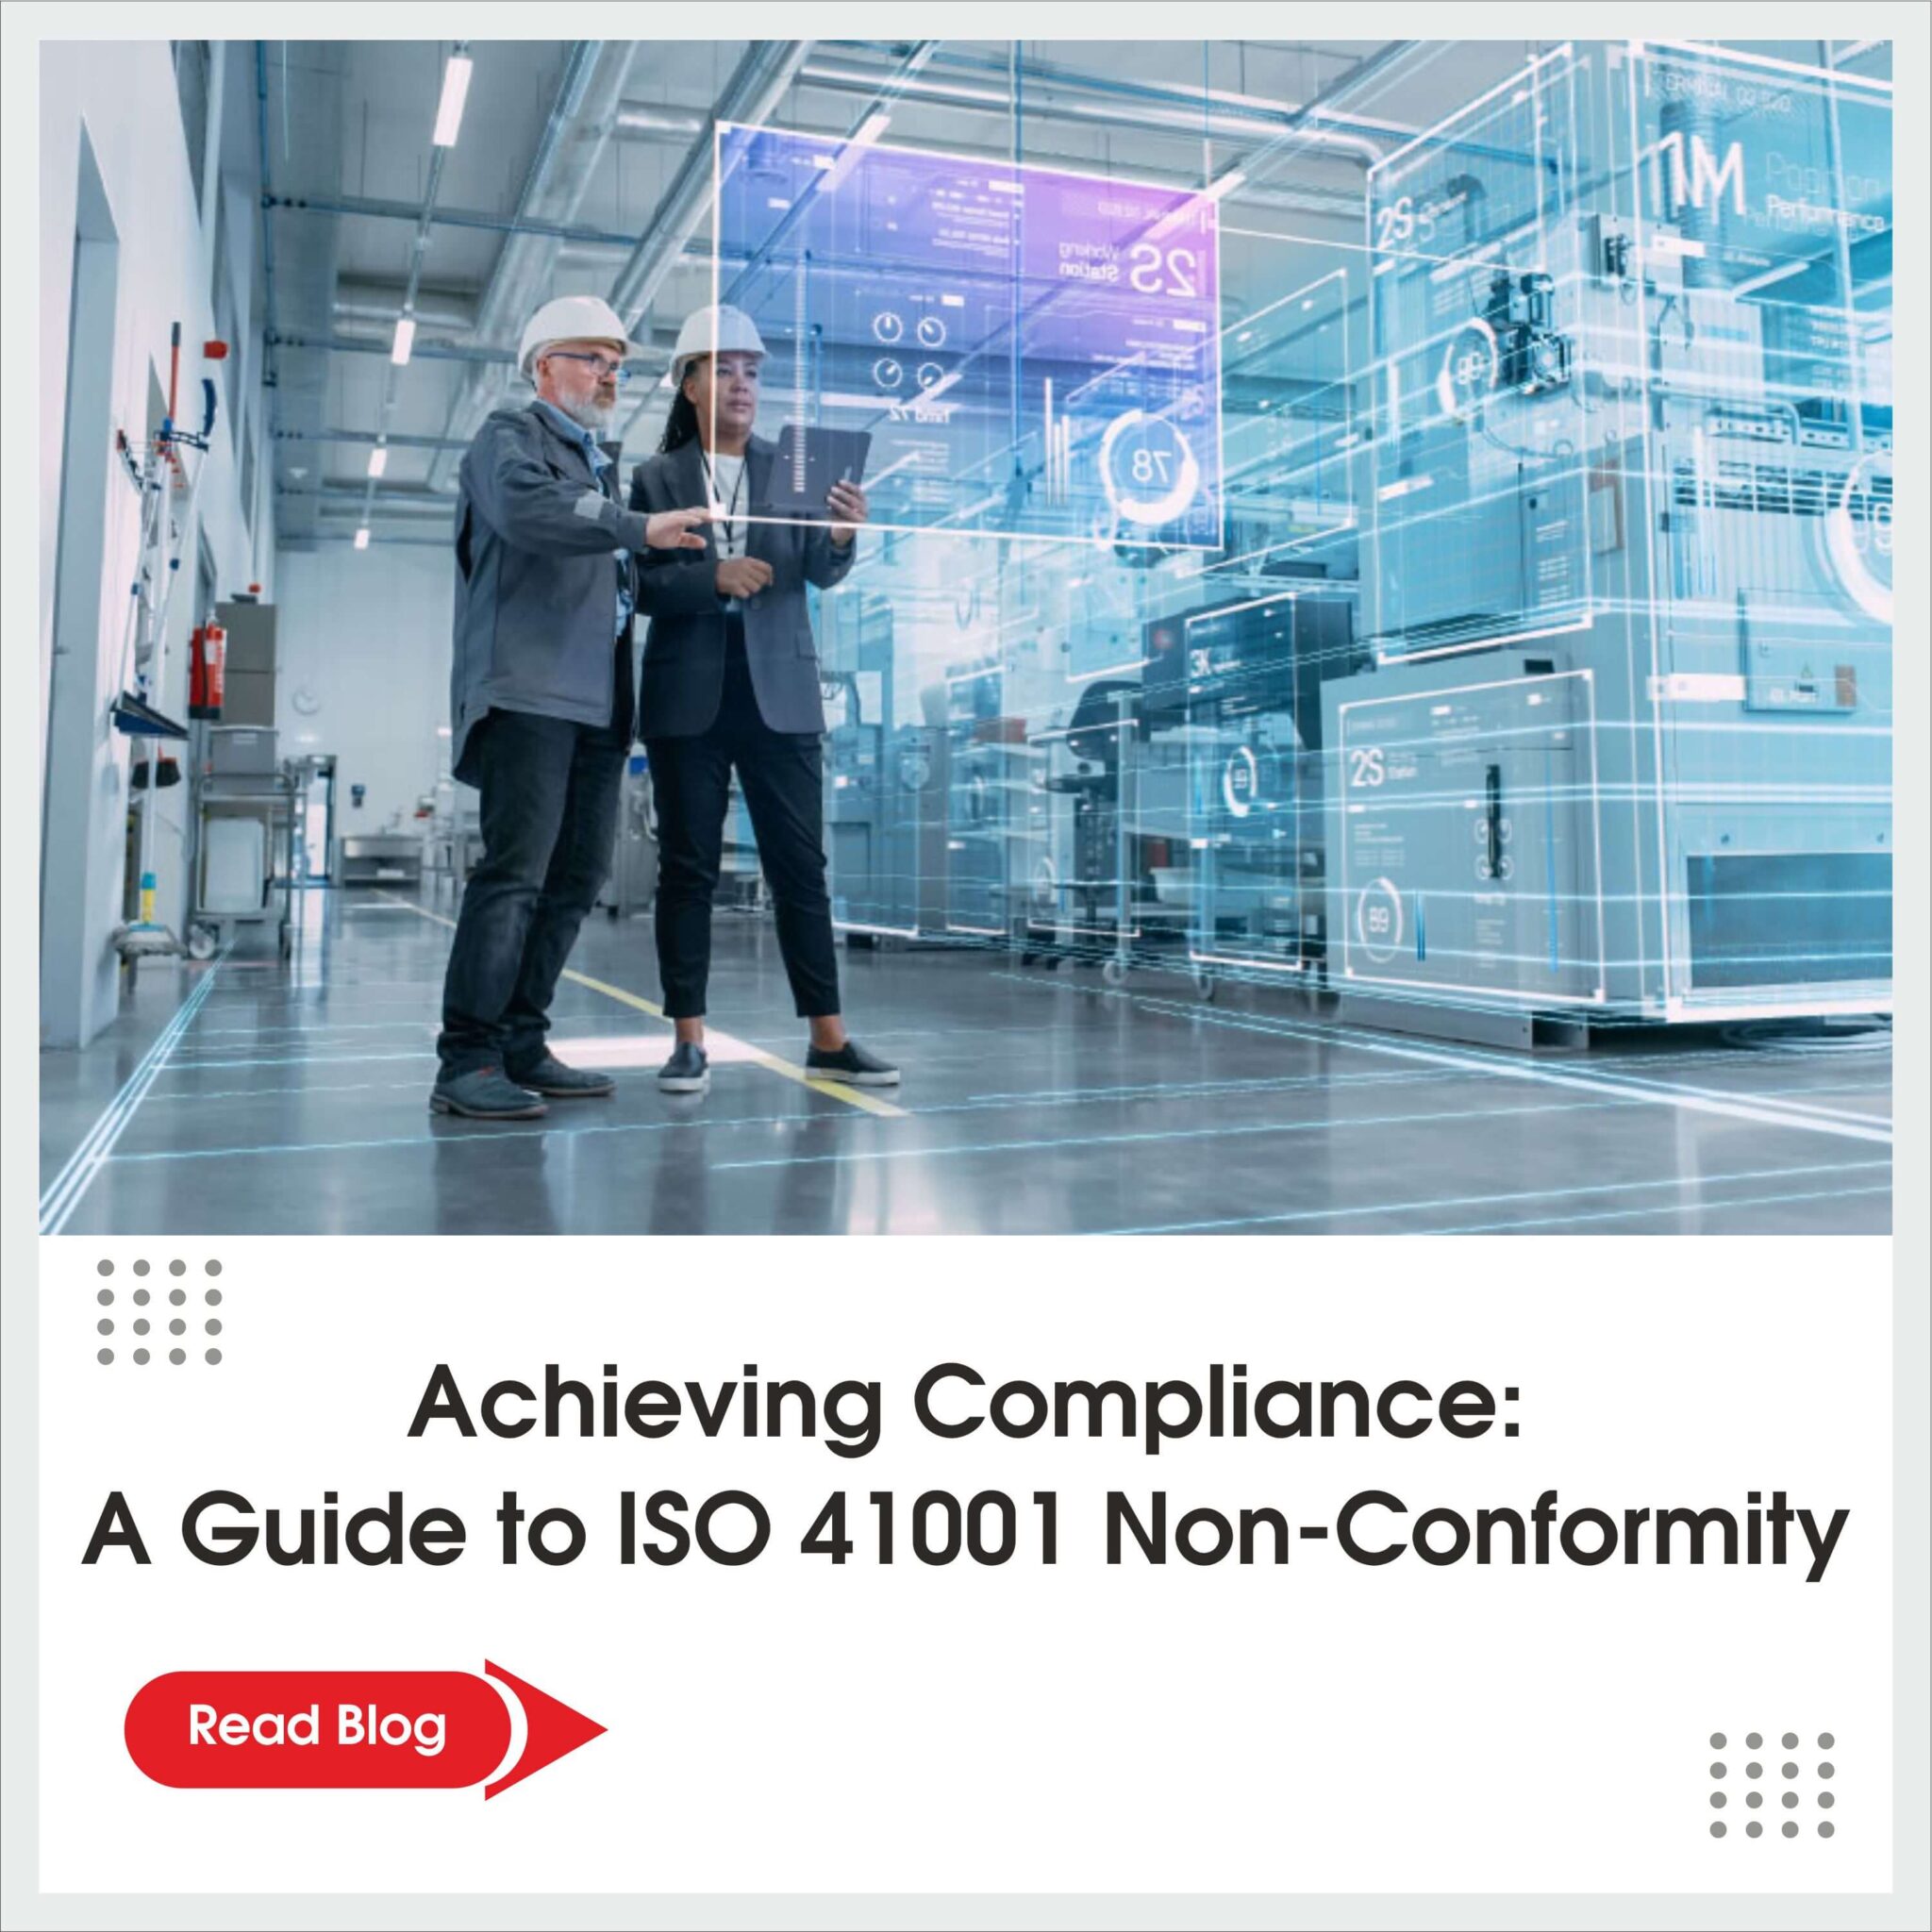 Achieving Compliance: A Guide to ISO 41001 Non-Conformity